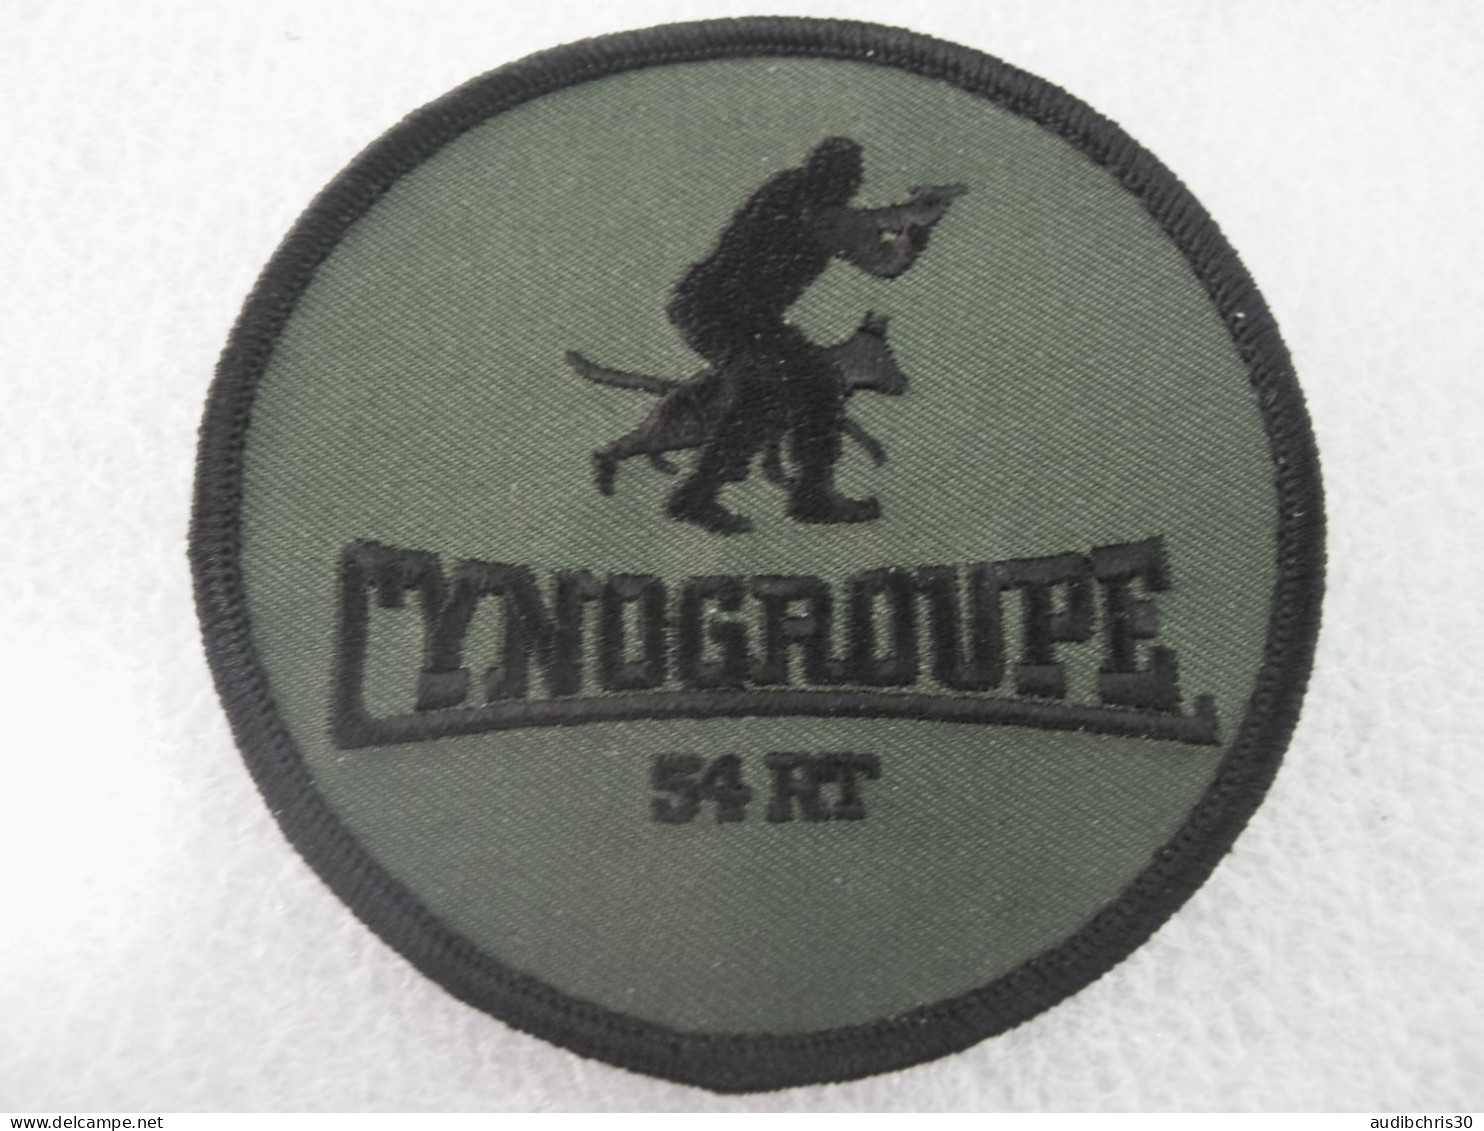 ECUSSON TRANSMISSIONS 54° RT LE GROUPE CYNOPHILE CYNOGROUPE OPEX SCRATCH 90MM - Army